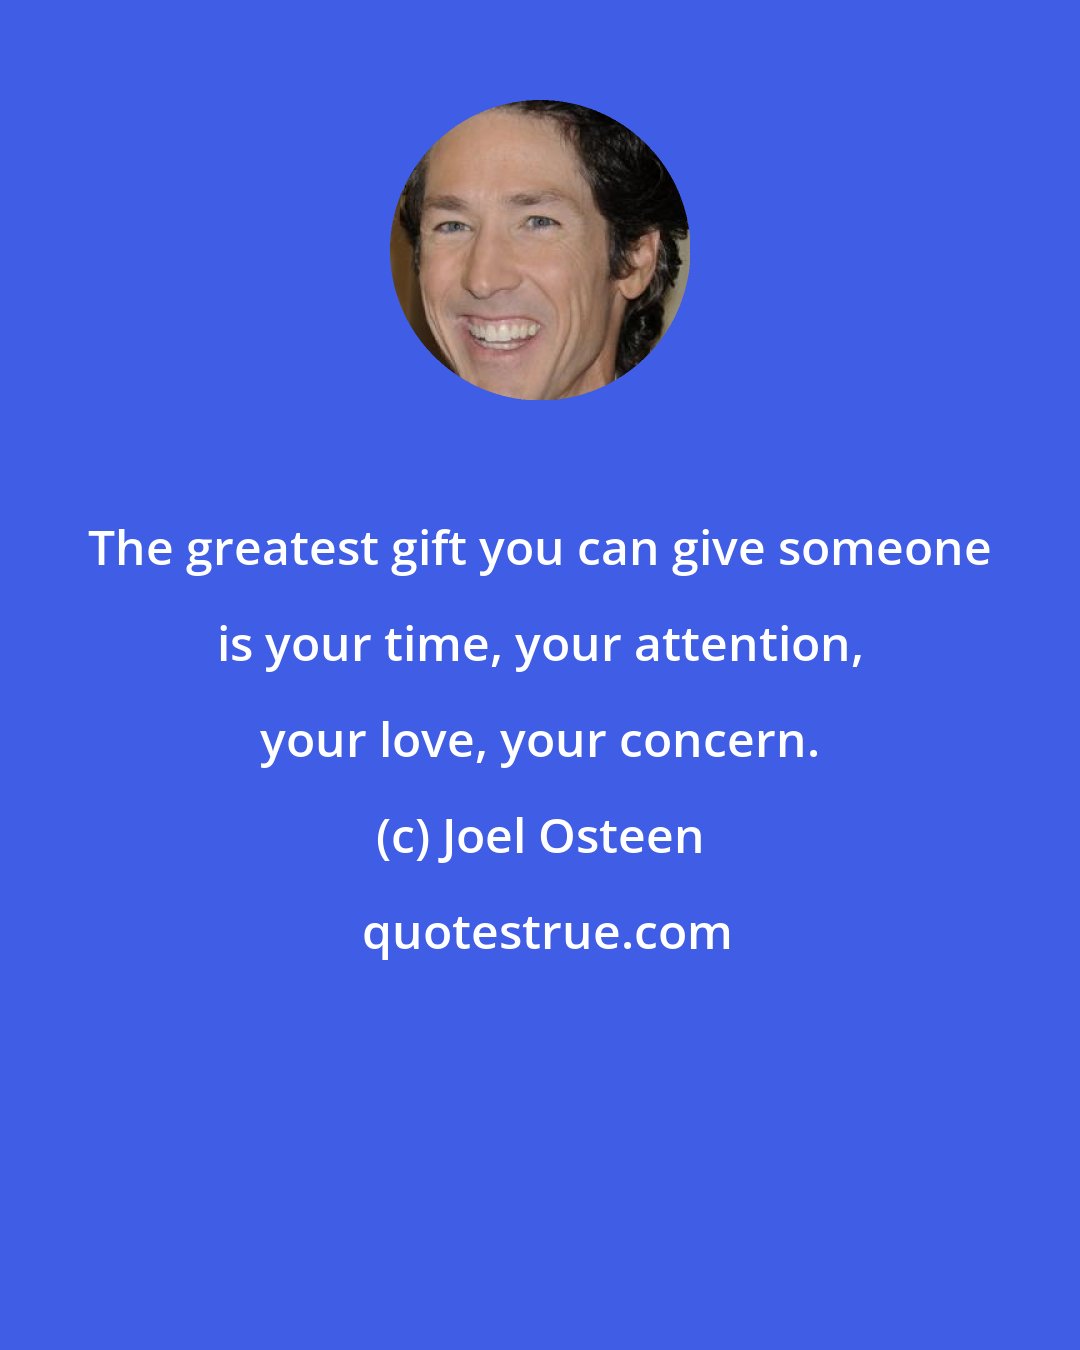 Joel Osteen: The greatest gift you can give someone is your time, your attention, your love, your concern.